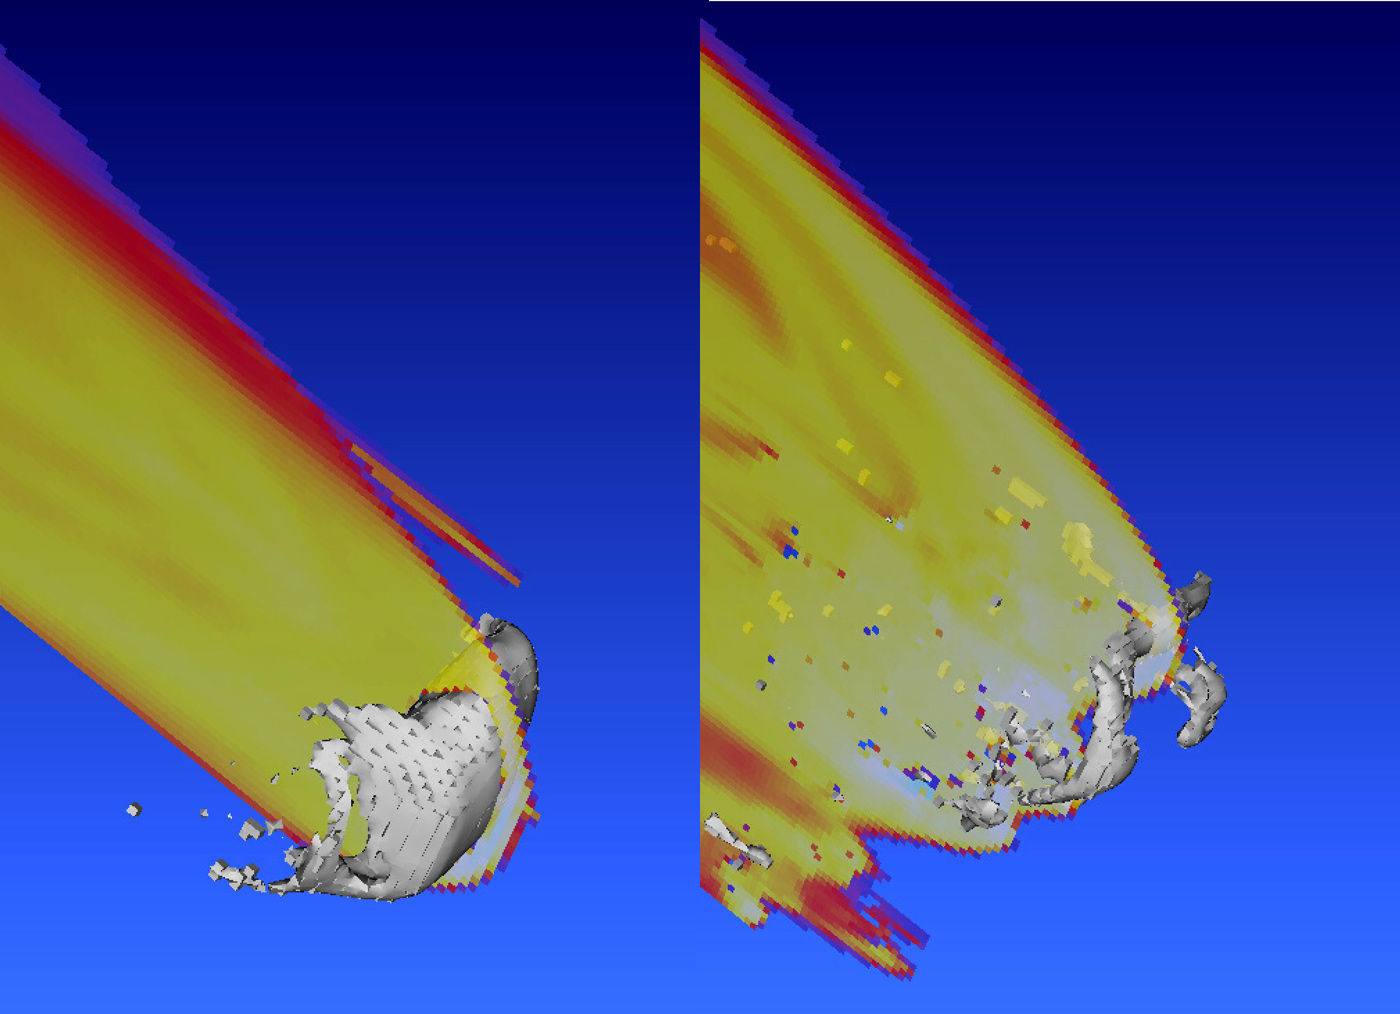 A computer simulation of the melting and final breakup of asteroid 2008 TC3 as it entered Earth's atmosphere. Photo: D. Robertson, NASA Ames Research Center.